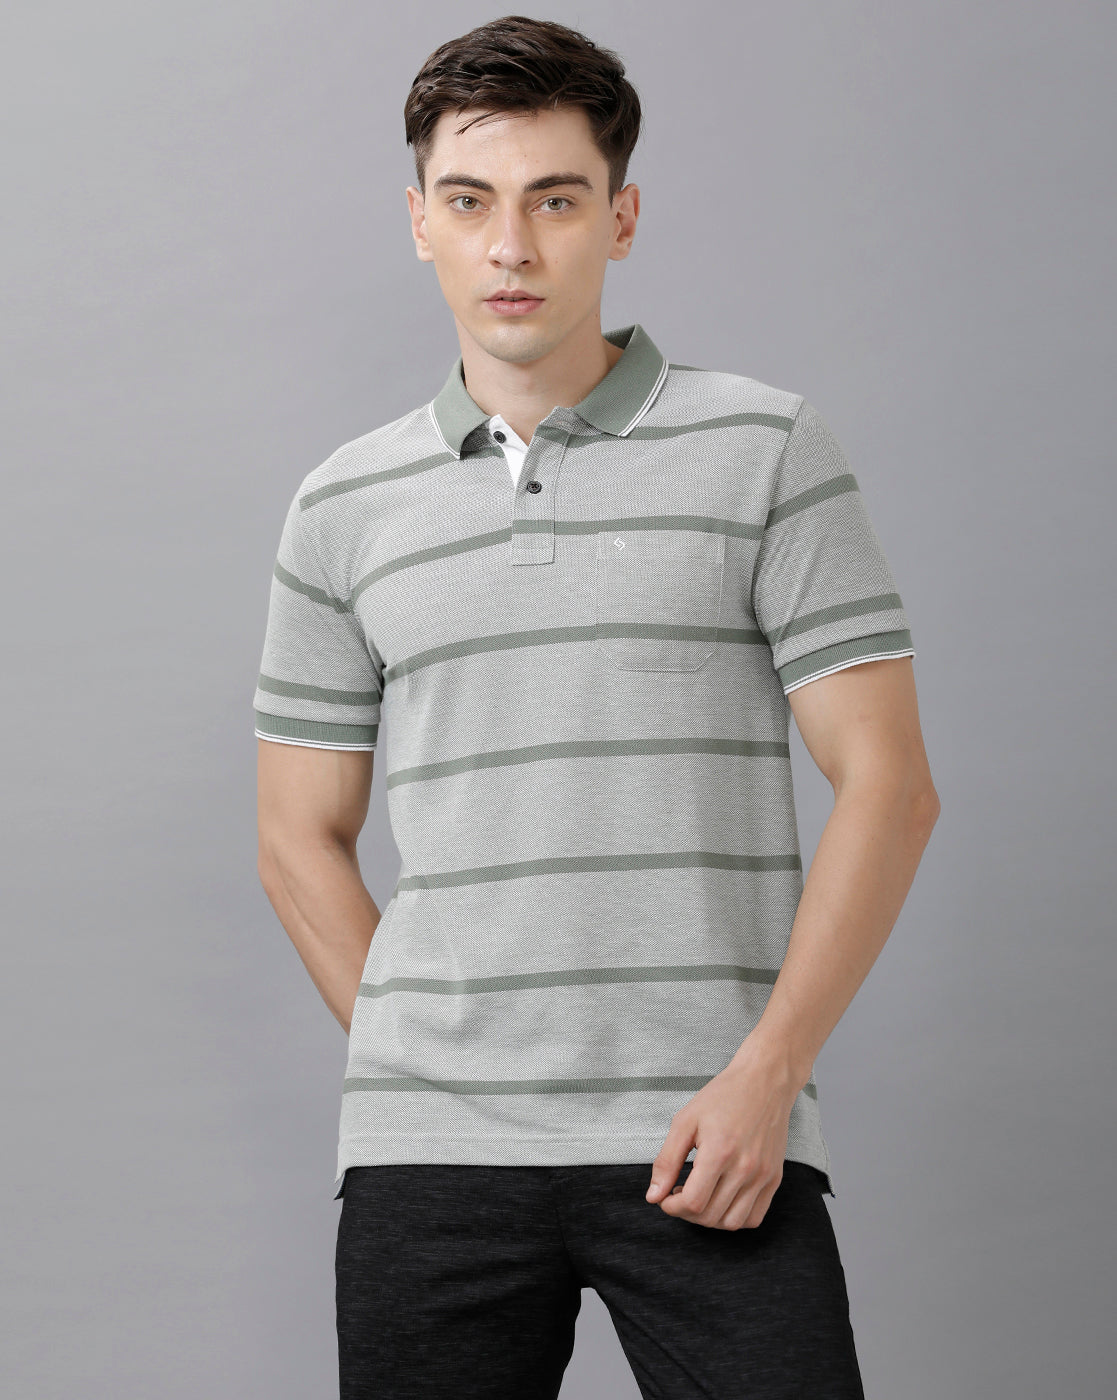 Classic Polo Mens Cotton Blend Striped Half Sleeve Slim Fit Polo Neck Grey Color T-Shirt | Adore 171 A